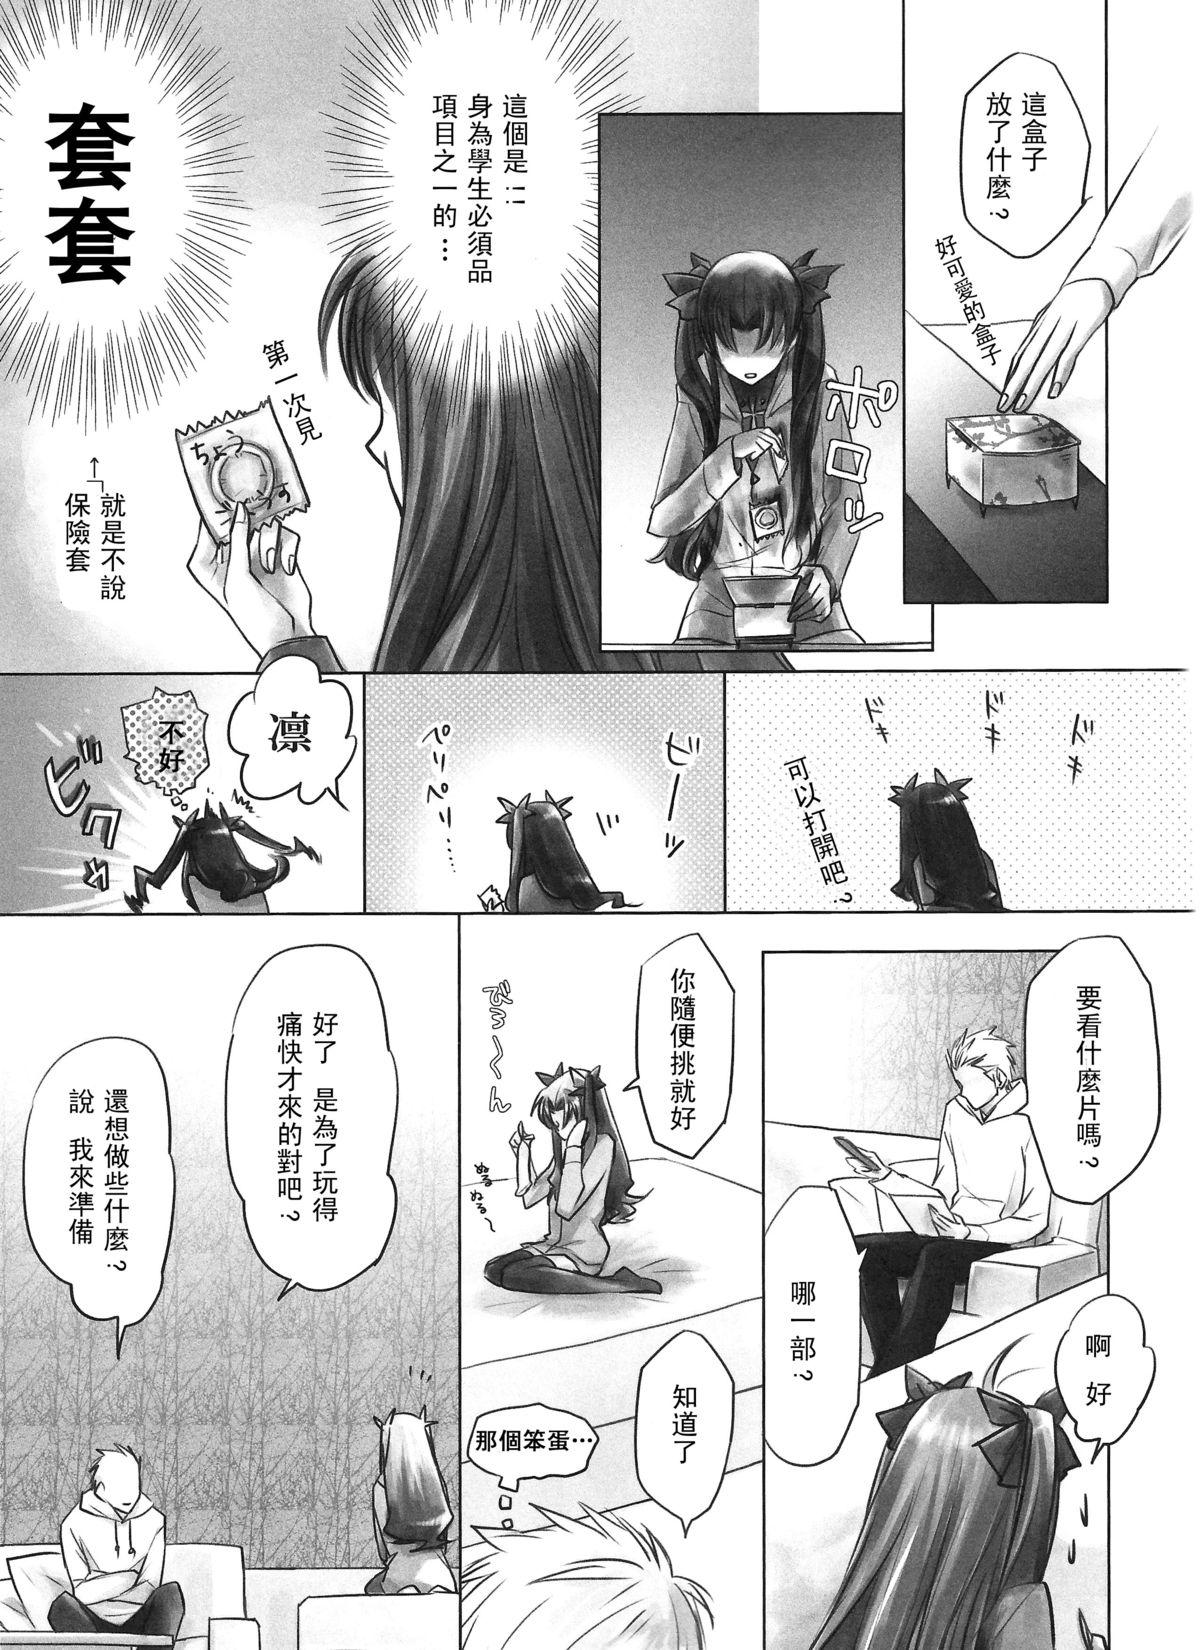 Pussy Fucking One/stay night - Fate stay night Gay Cock - Page 7